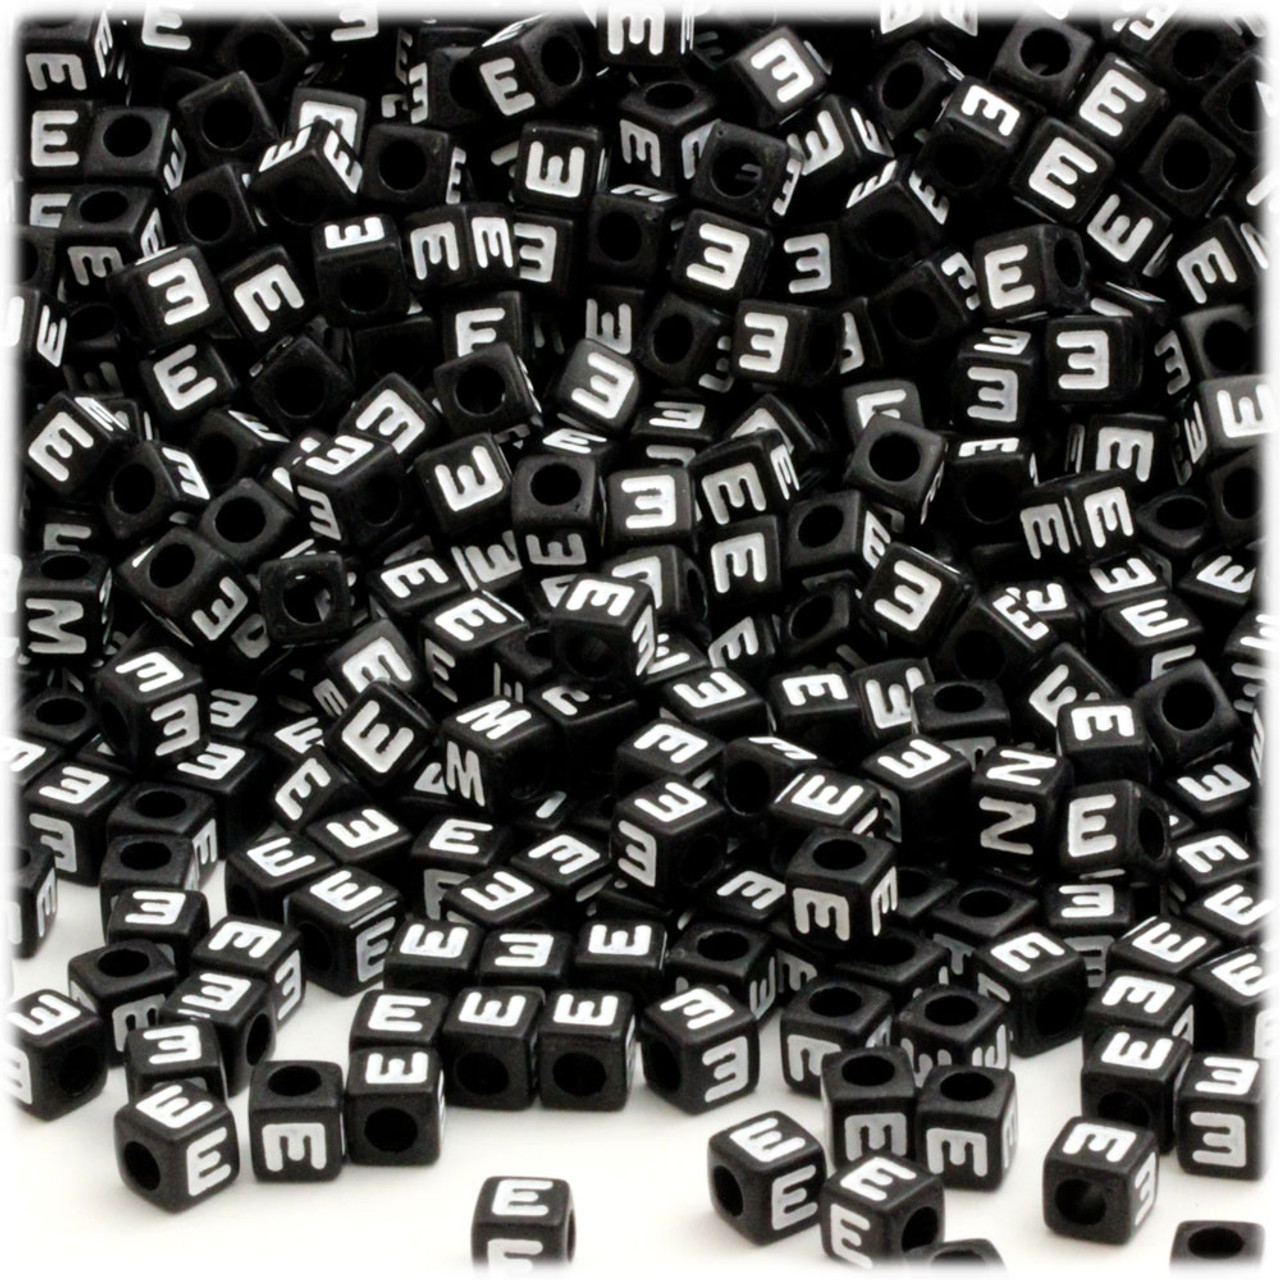 250 Black Acrylic Assorted Alphabet Letter Coin Beads 4X7mm (0.16